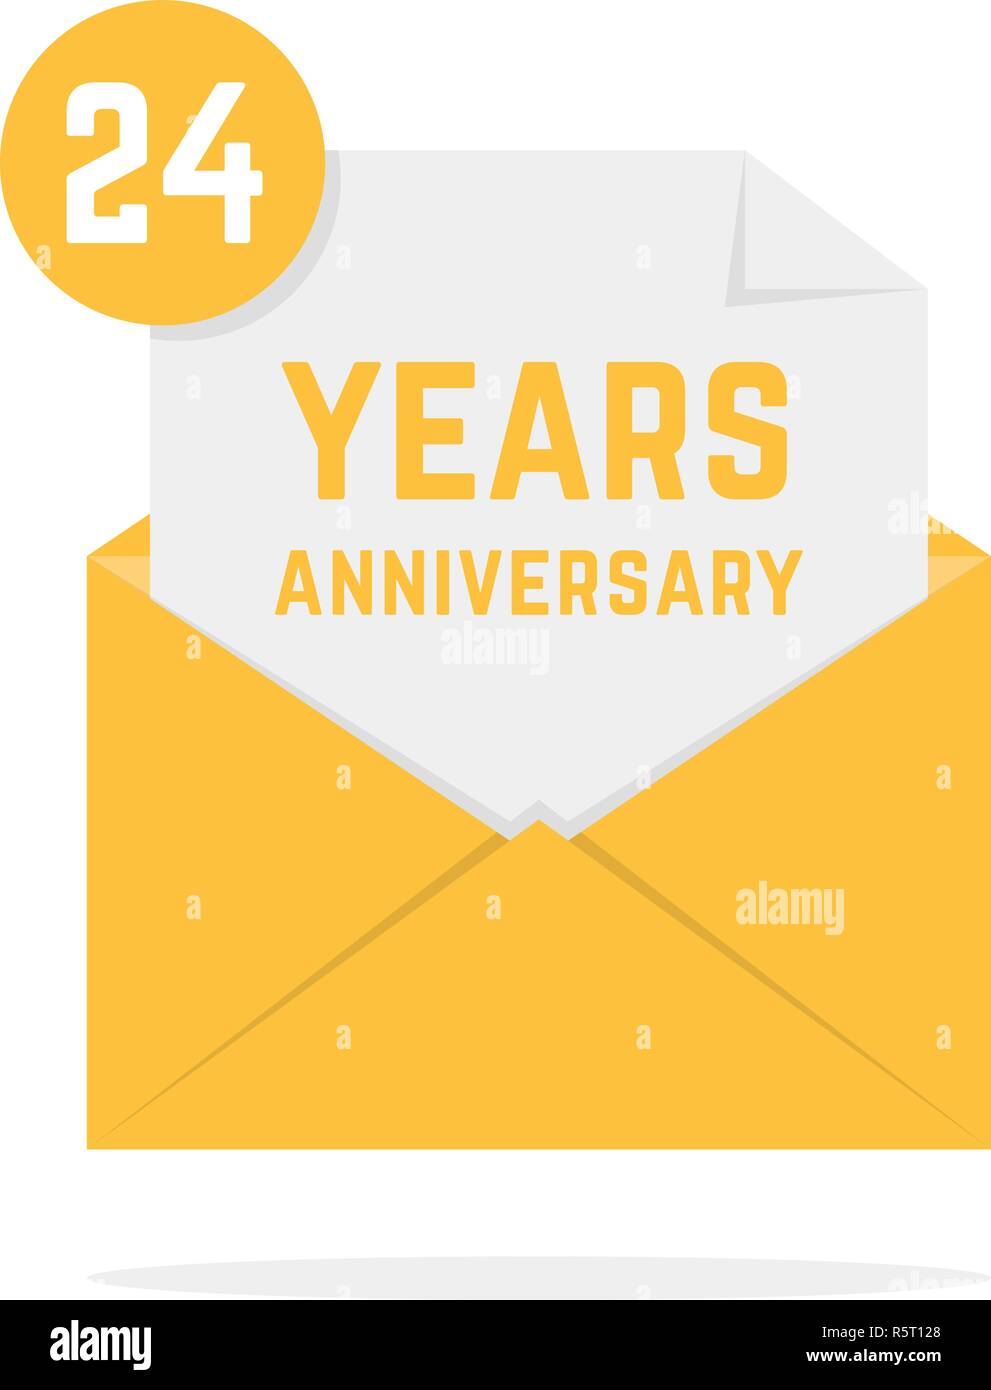 24 years anniversary icon in open letter Stock Vector